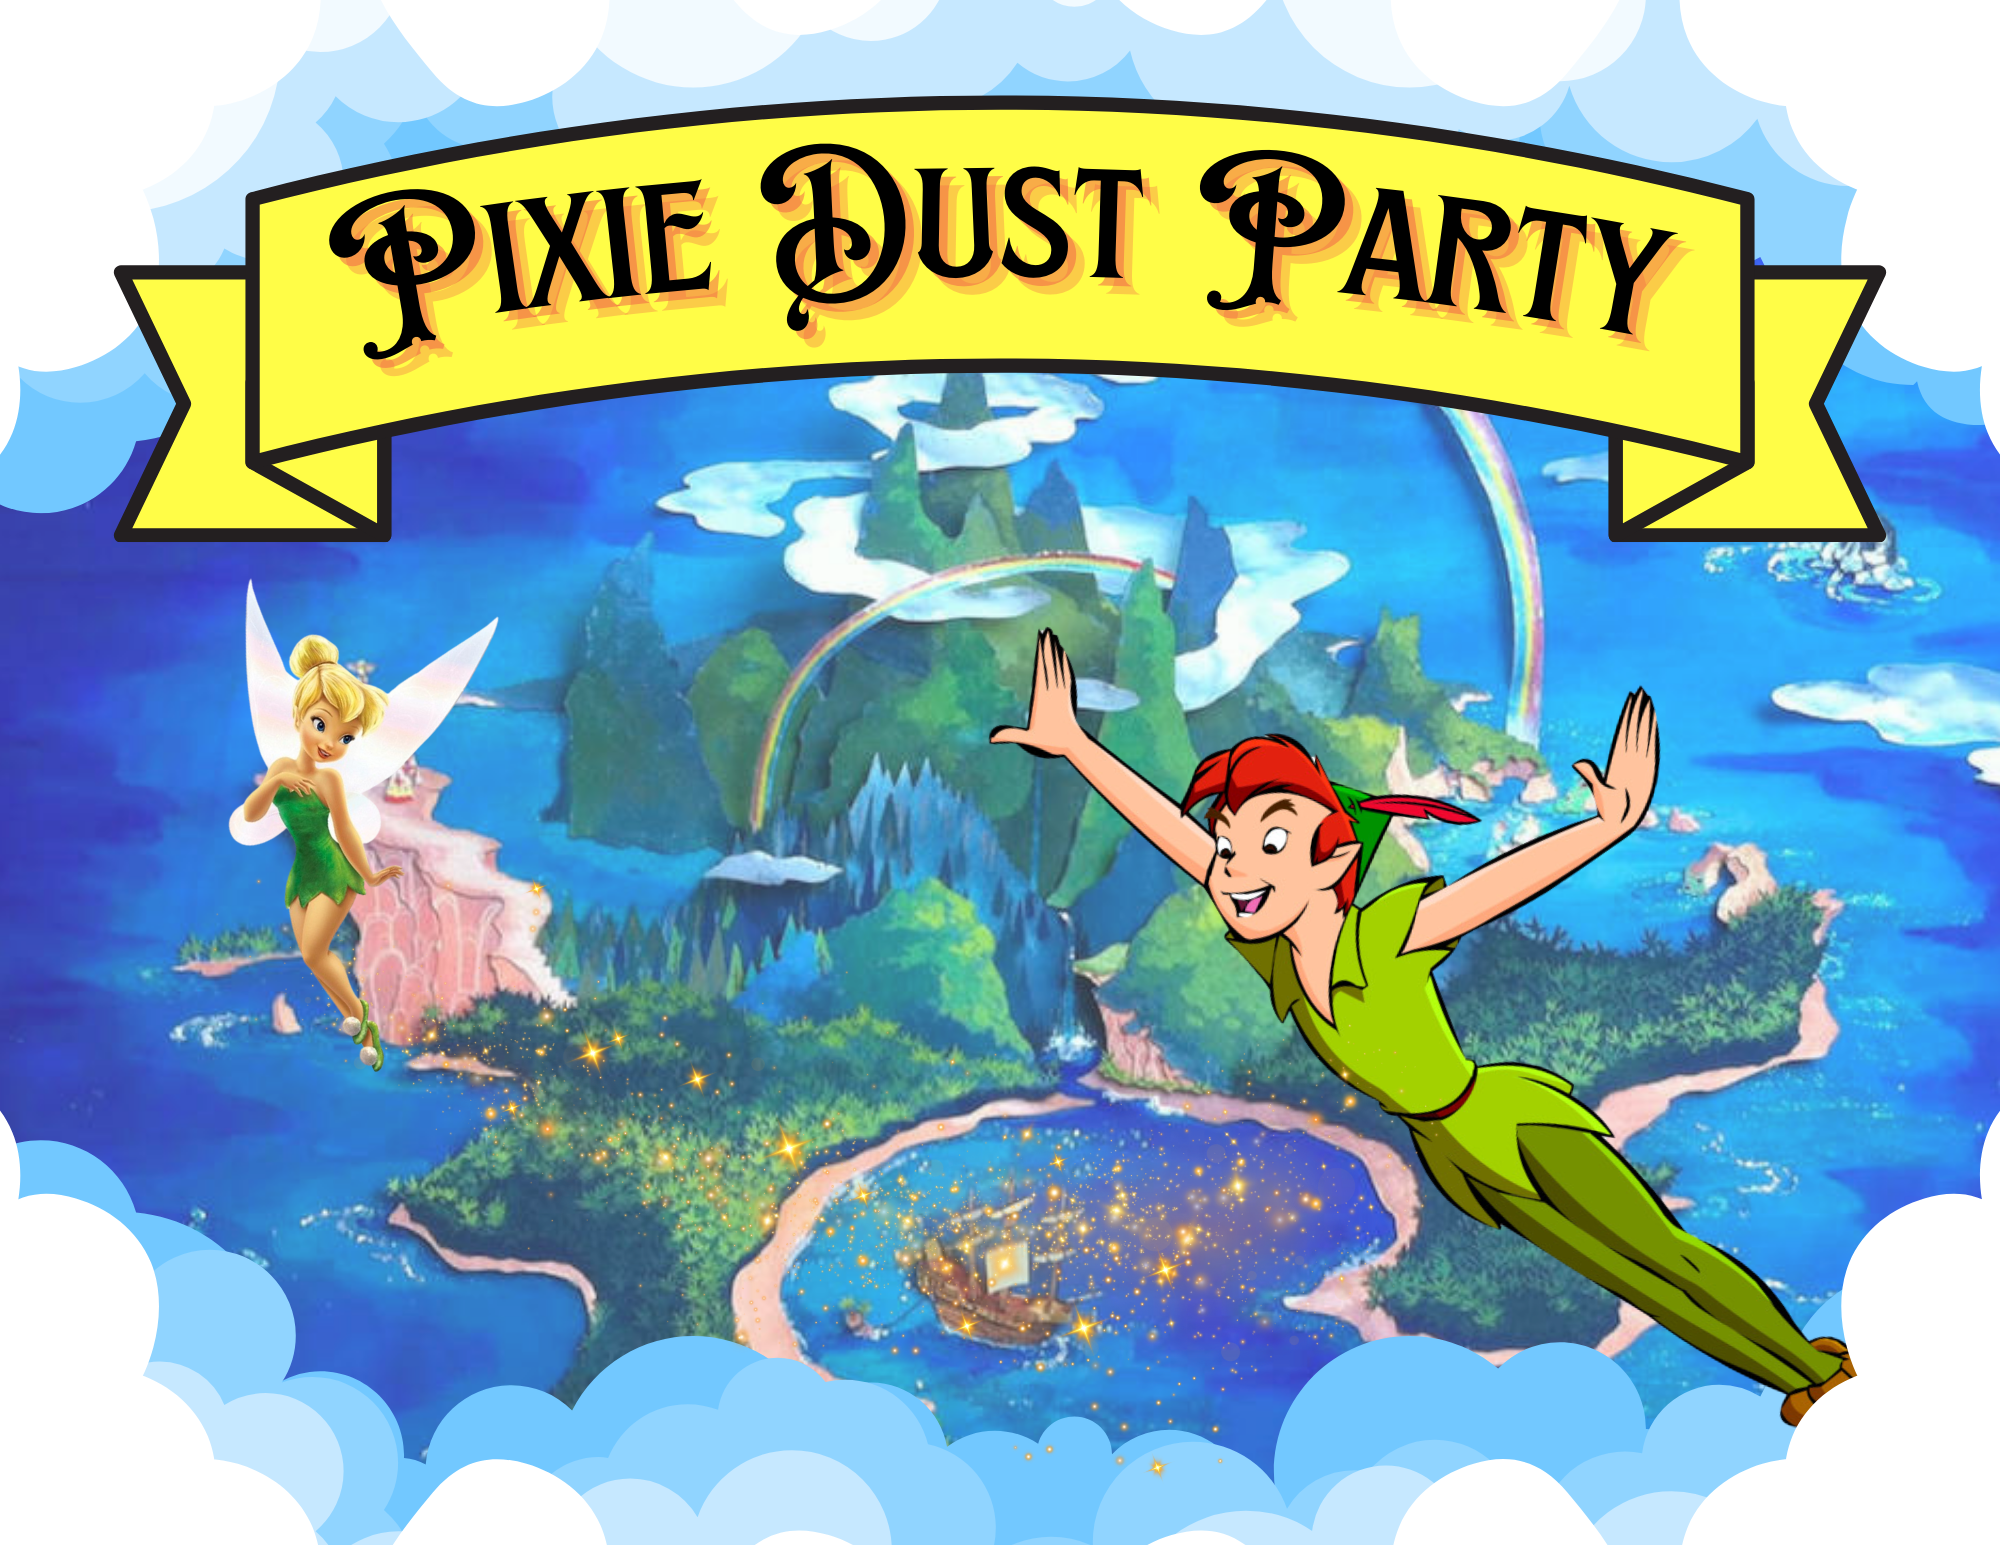 Image of Peter Pan and Tinker Bell with "Pixie Dust Party" written above